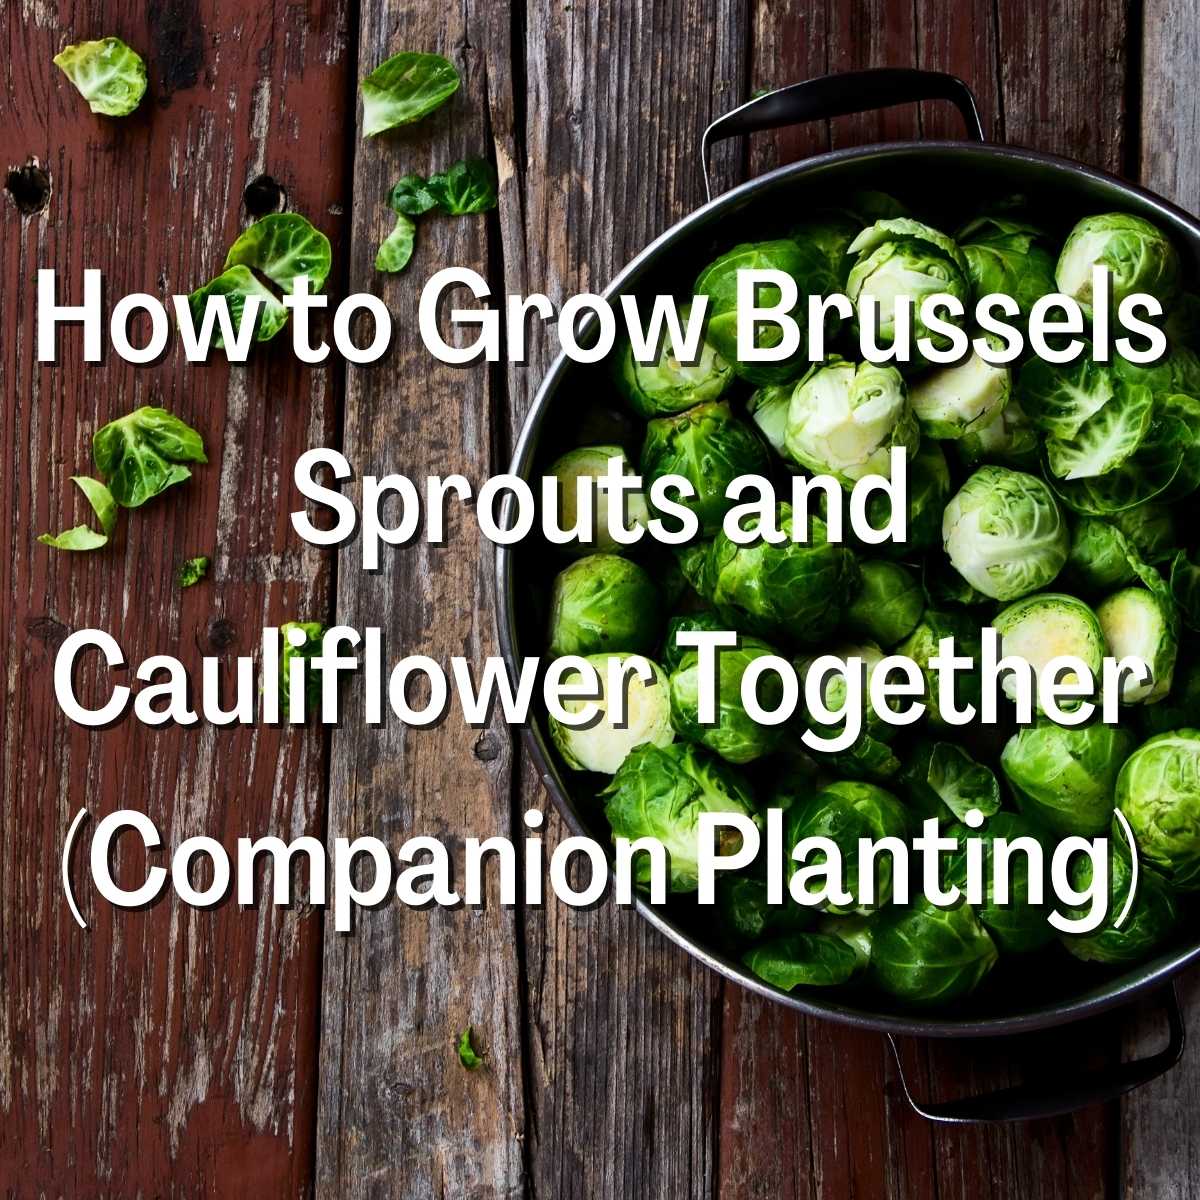 How to Grow Brussels Sprouts and Cauliflower Together